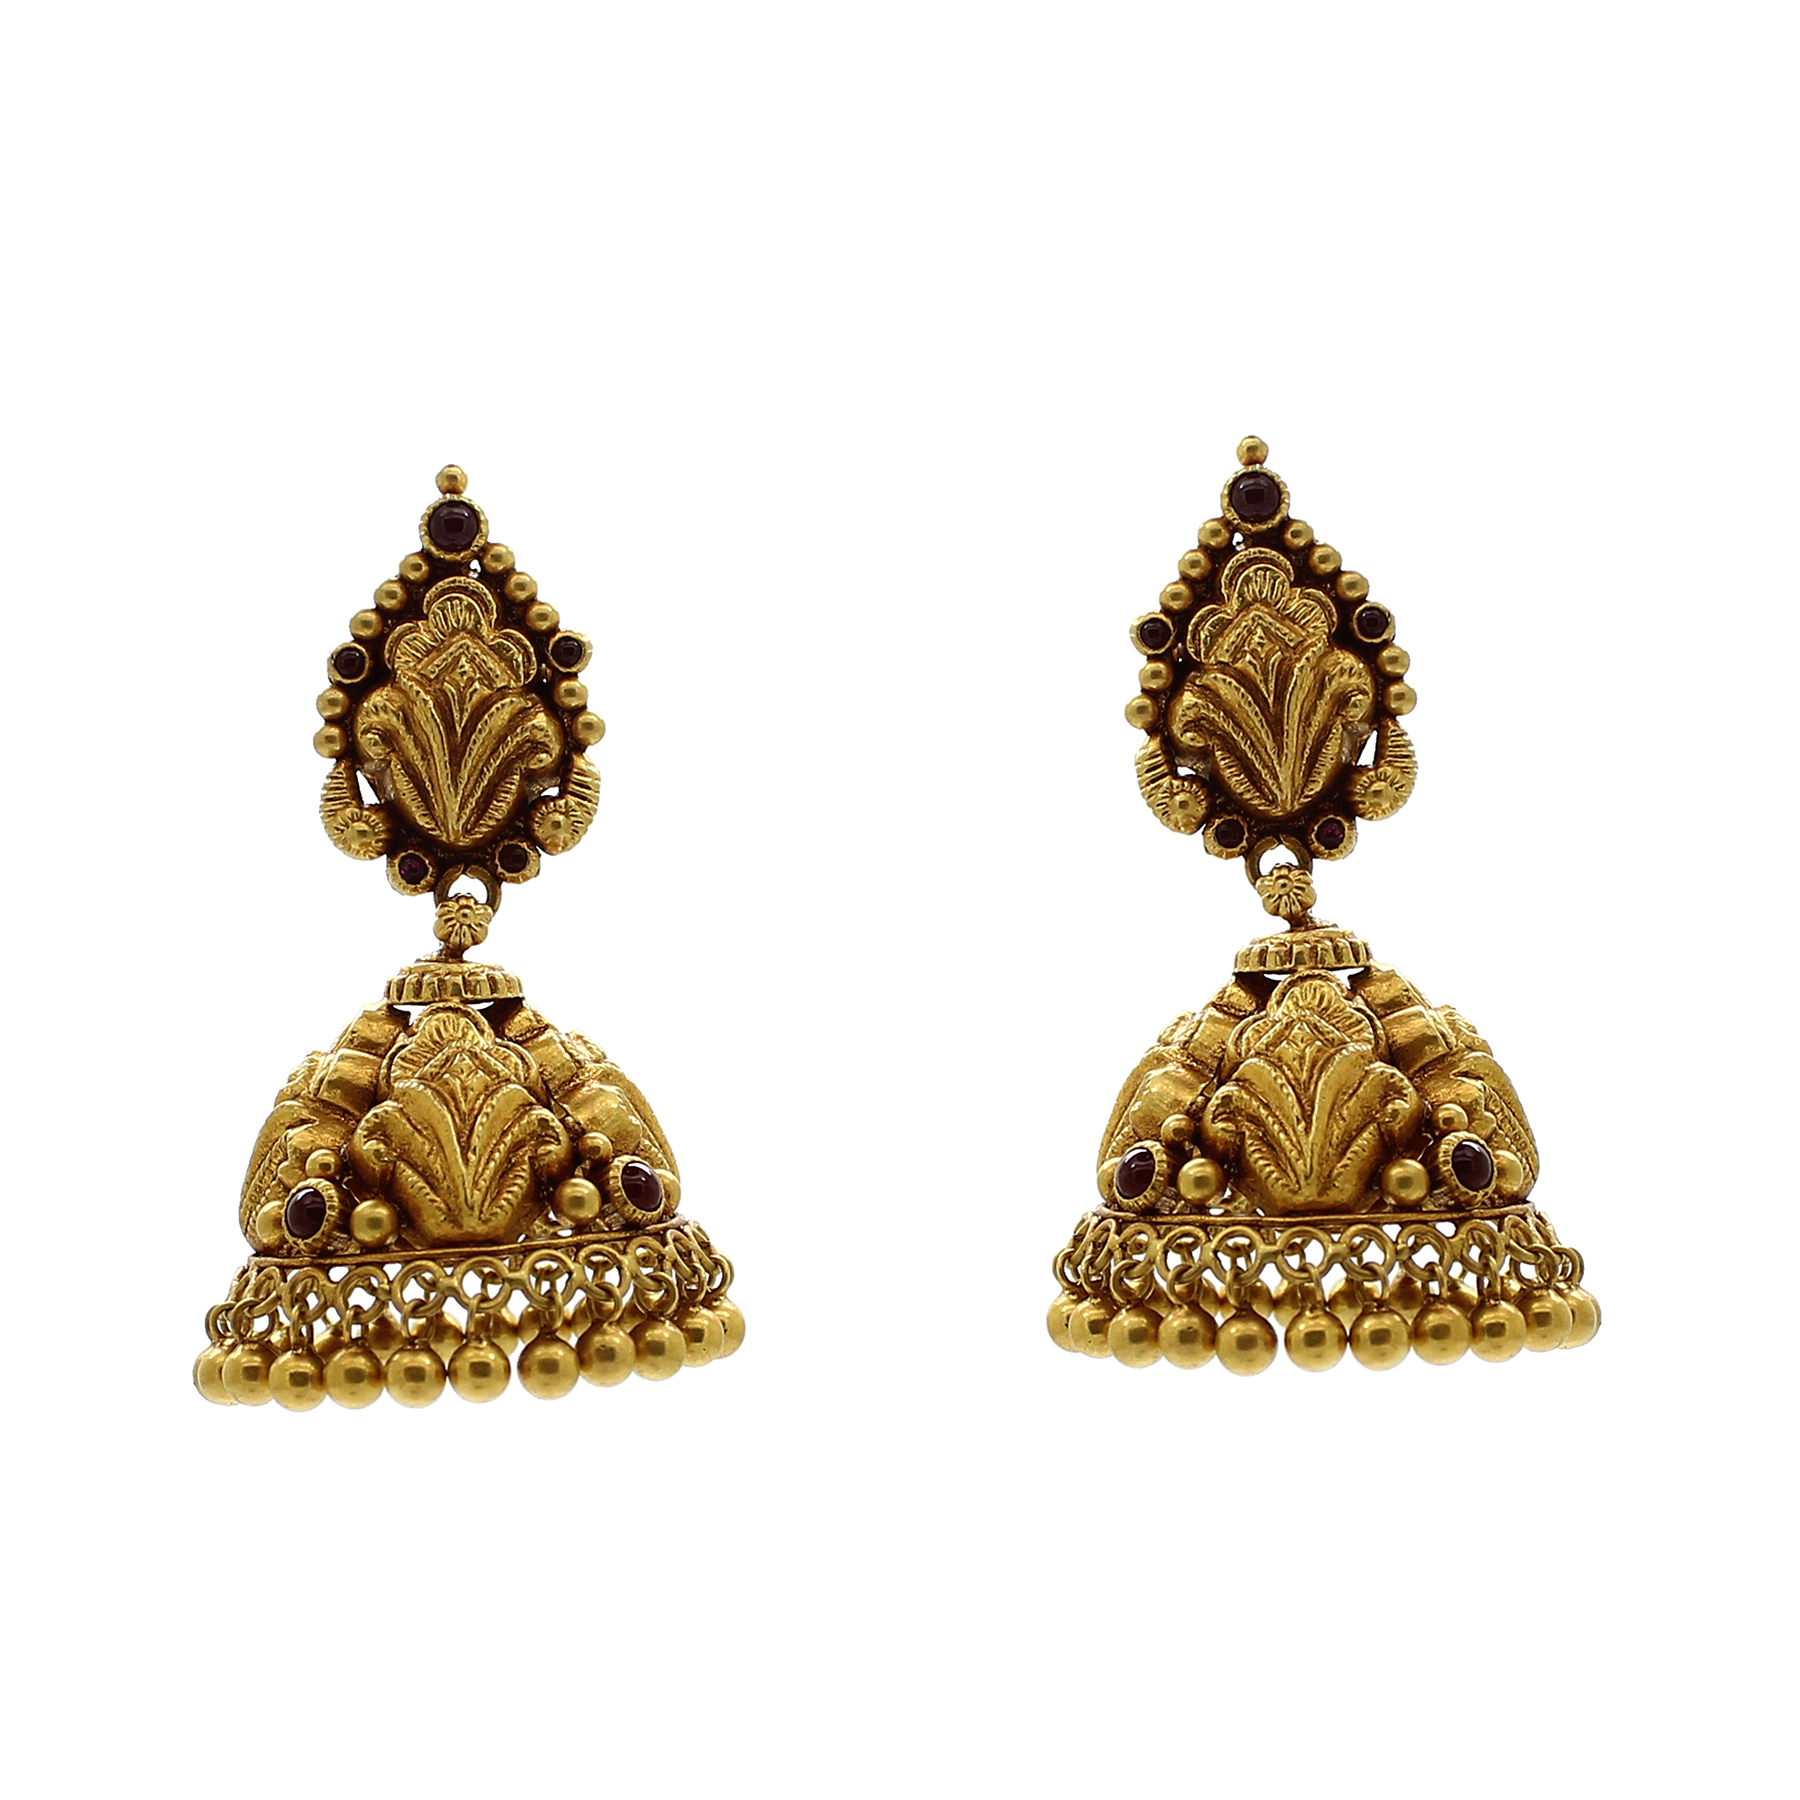 24कयरट सनक झमक new gold earrings design with price in nepal  sunko  jhumka design with price  YouTube